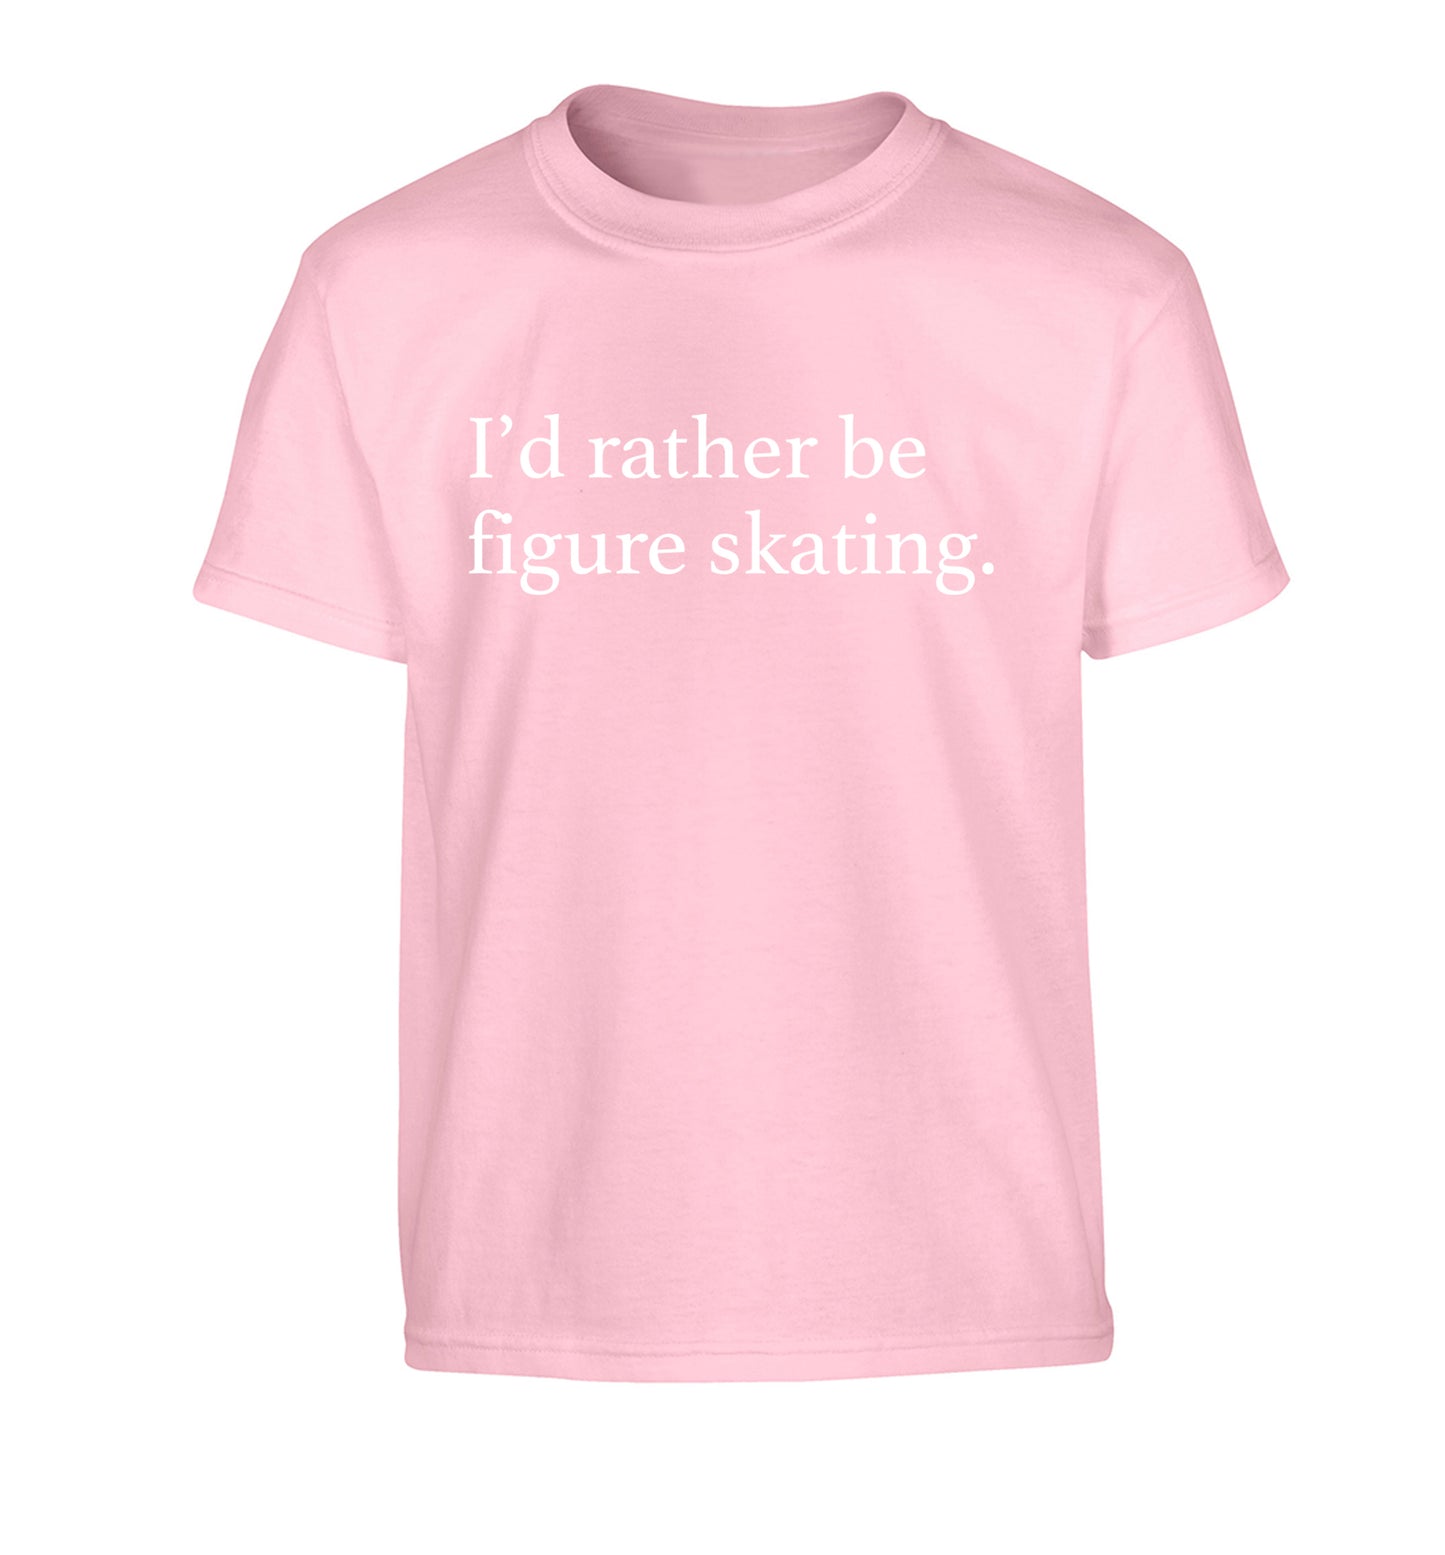 I'd rather be figure skating Children's light pink Tshirt 12-14 Years